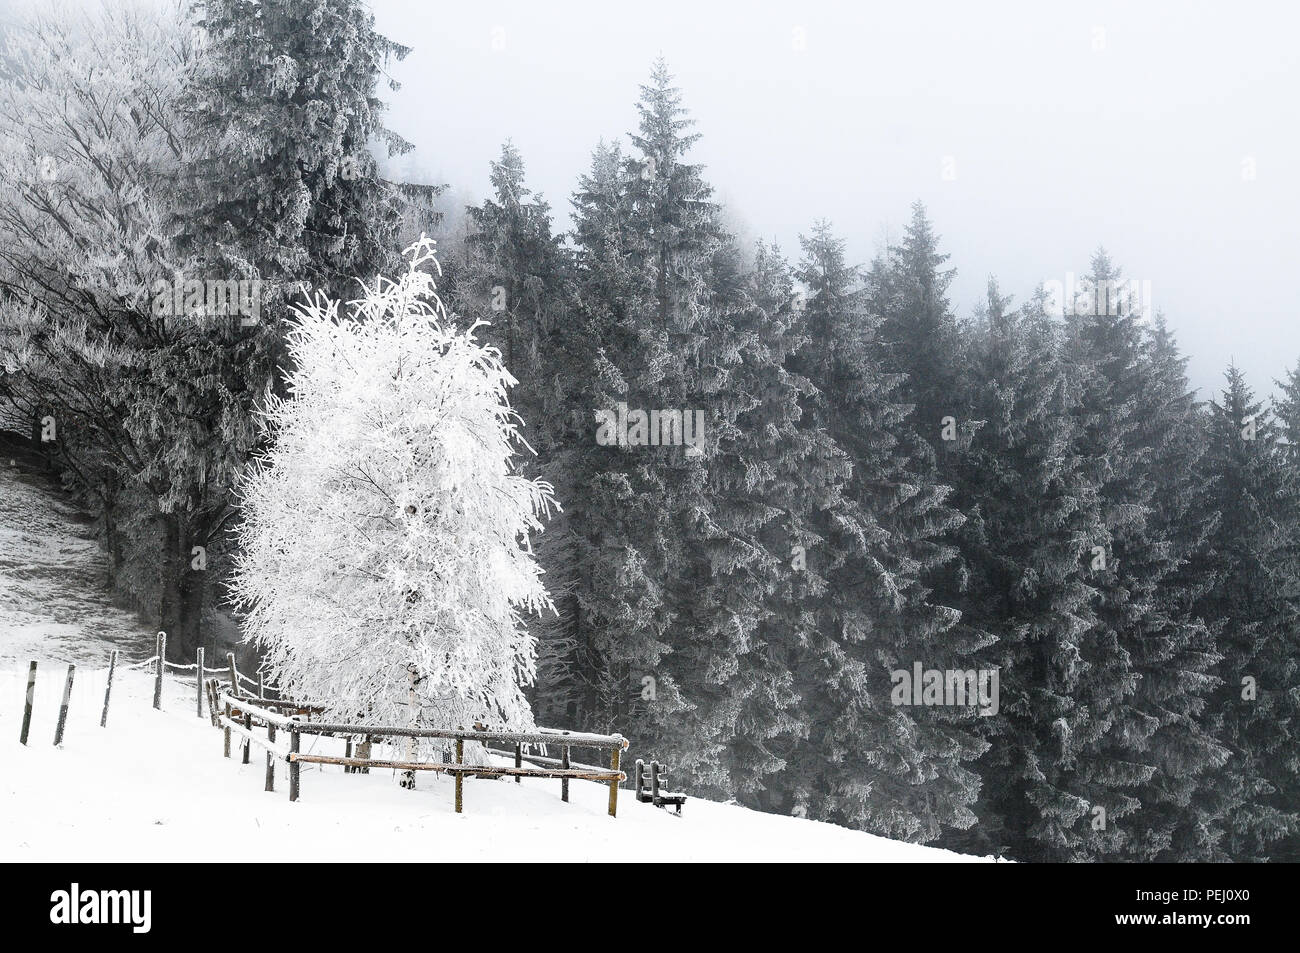 Snow-covered trees in the foothills of the Alps near Pfronten, Allgäu, Germany Stock Photo